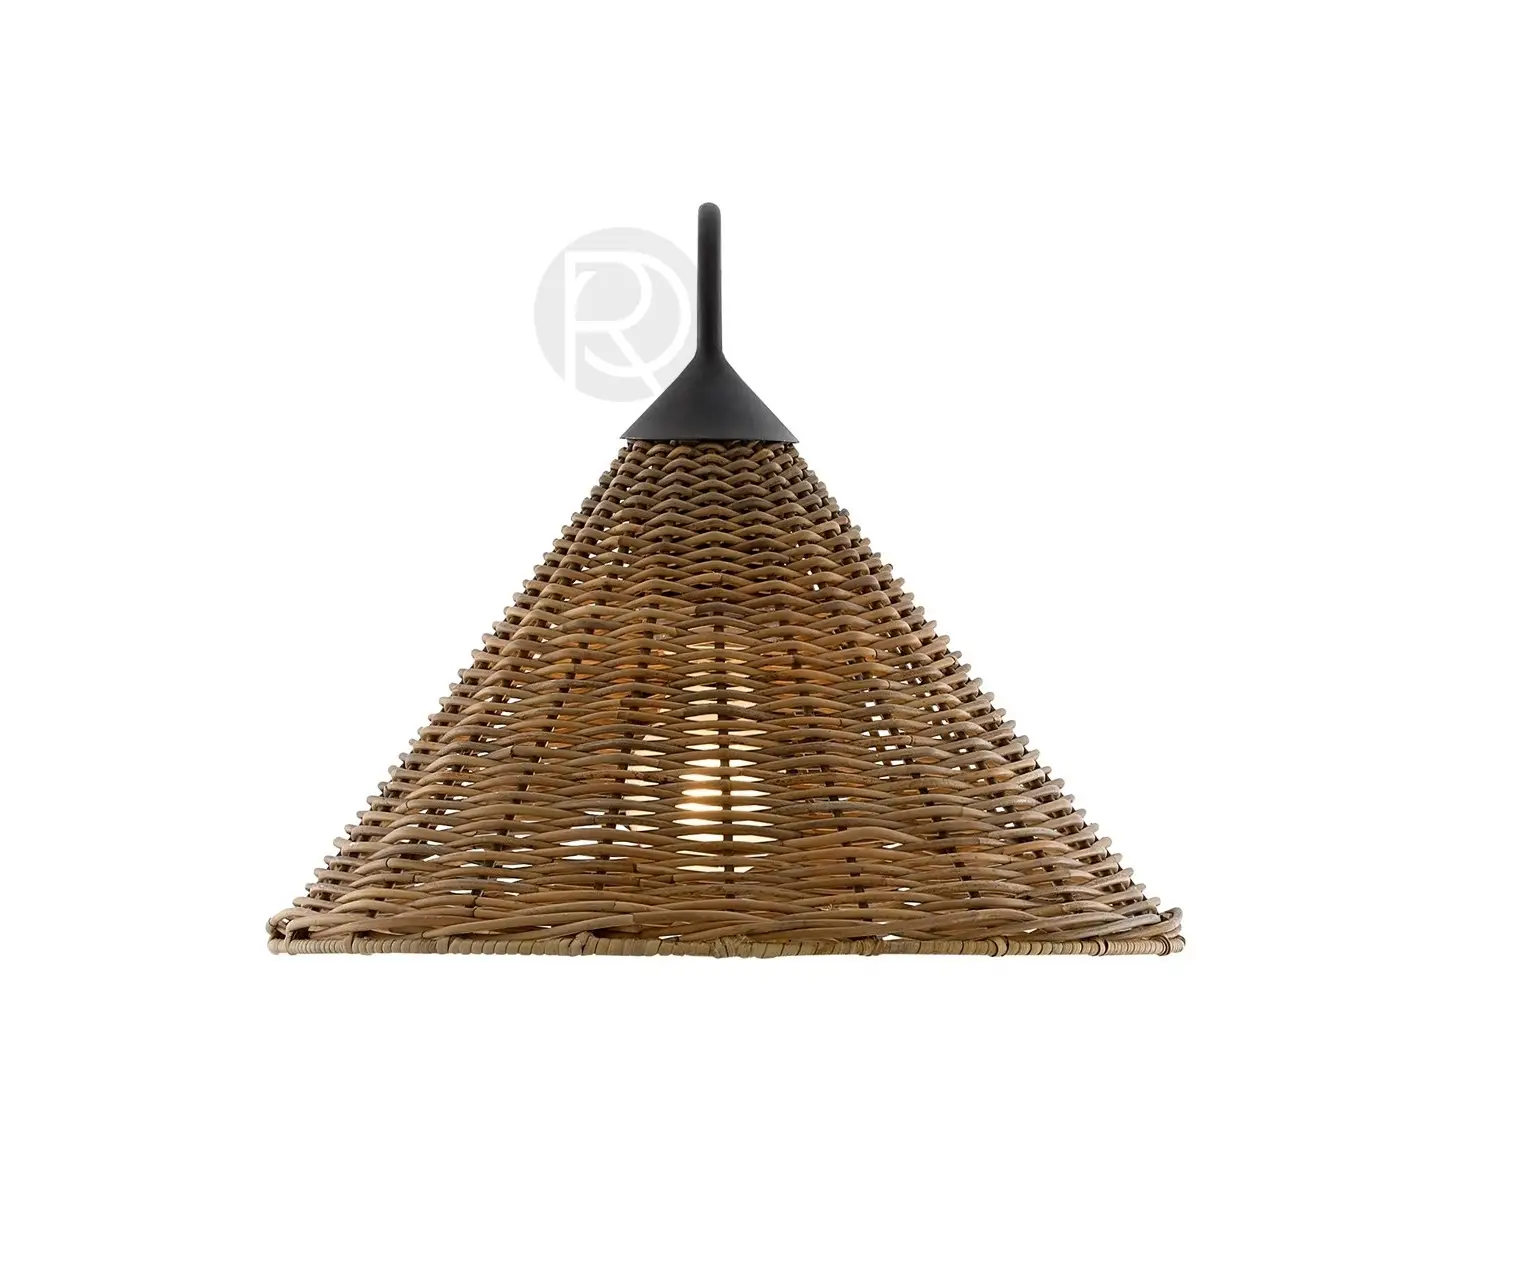 Wall lamp (Sconce) BASKET SWING ARM by Currey & Company